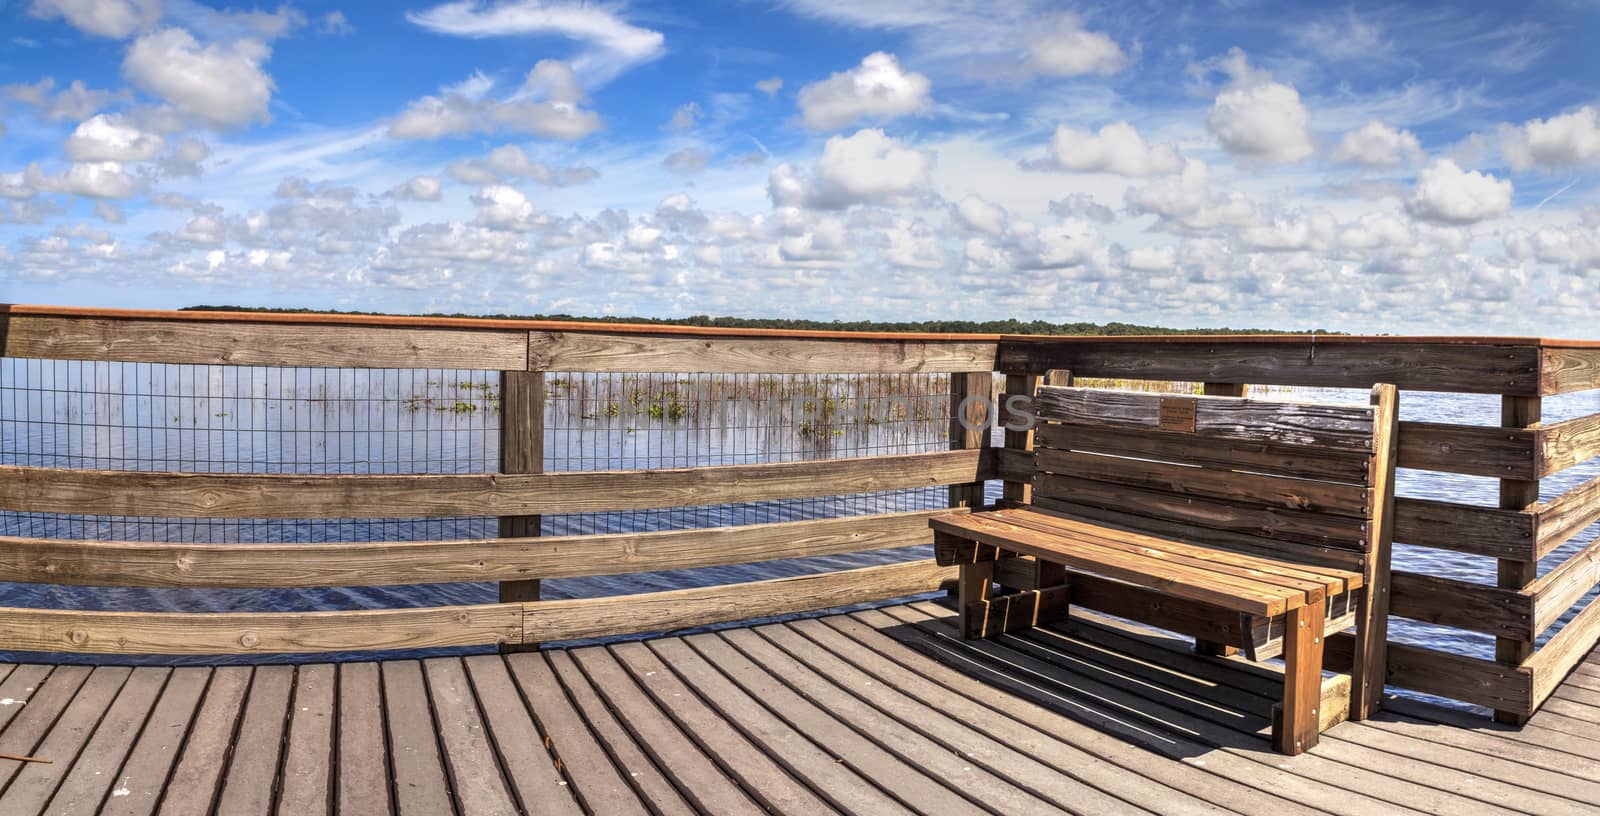 Boardwalk with benches overlooking the flooded swamp of Myakka R by steffstarr